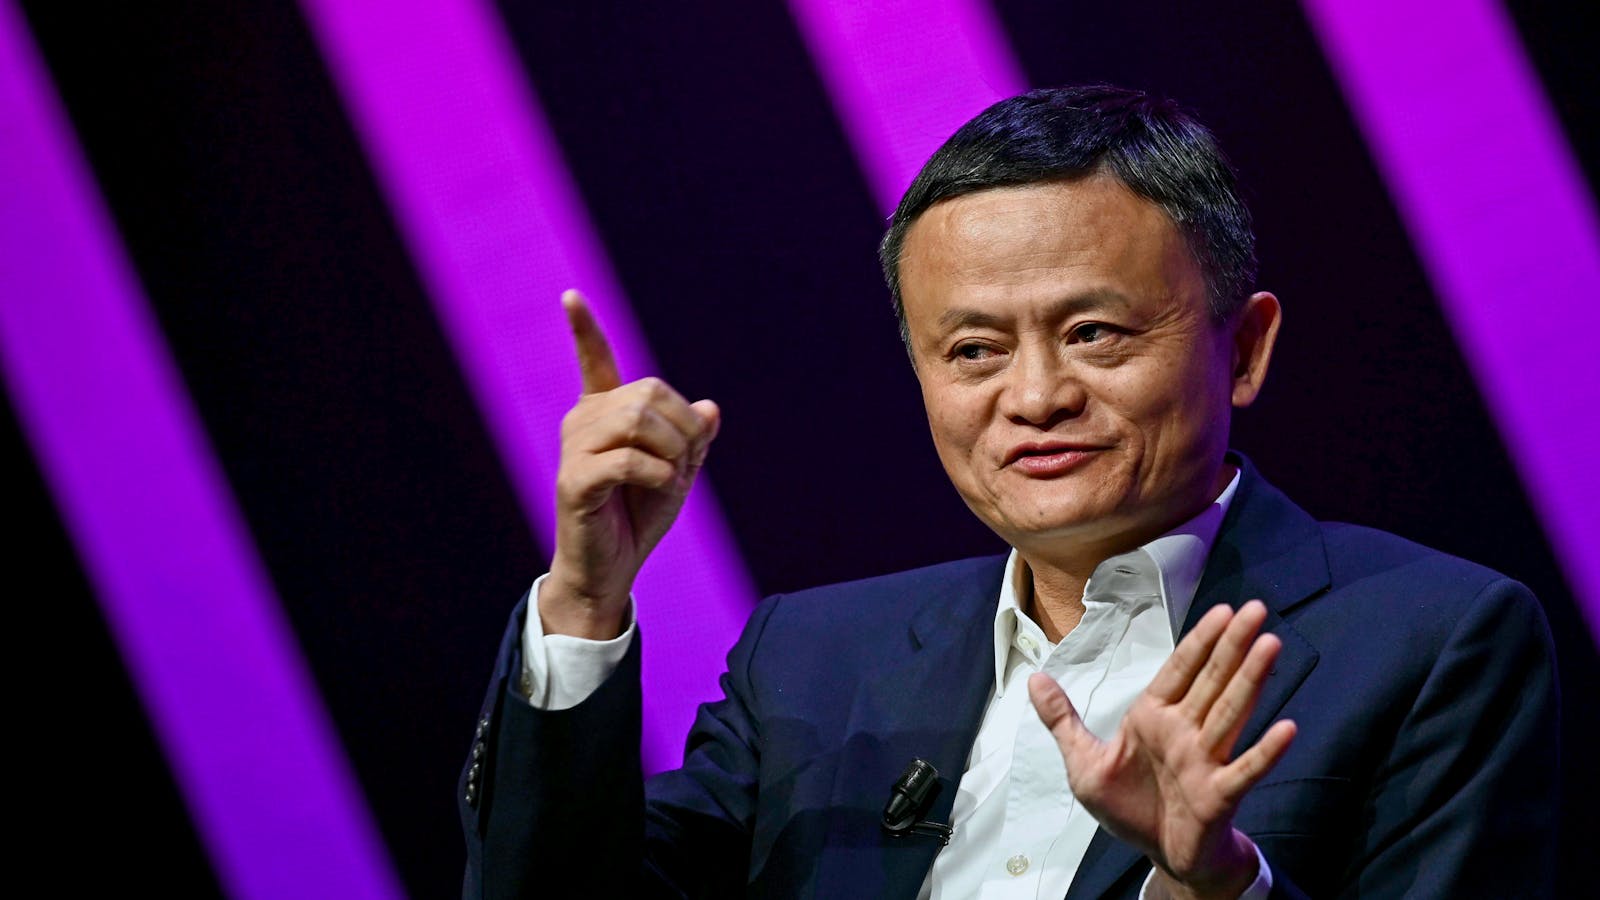 Jack Ma in Paris in 2019. Photo by Getty Images